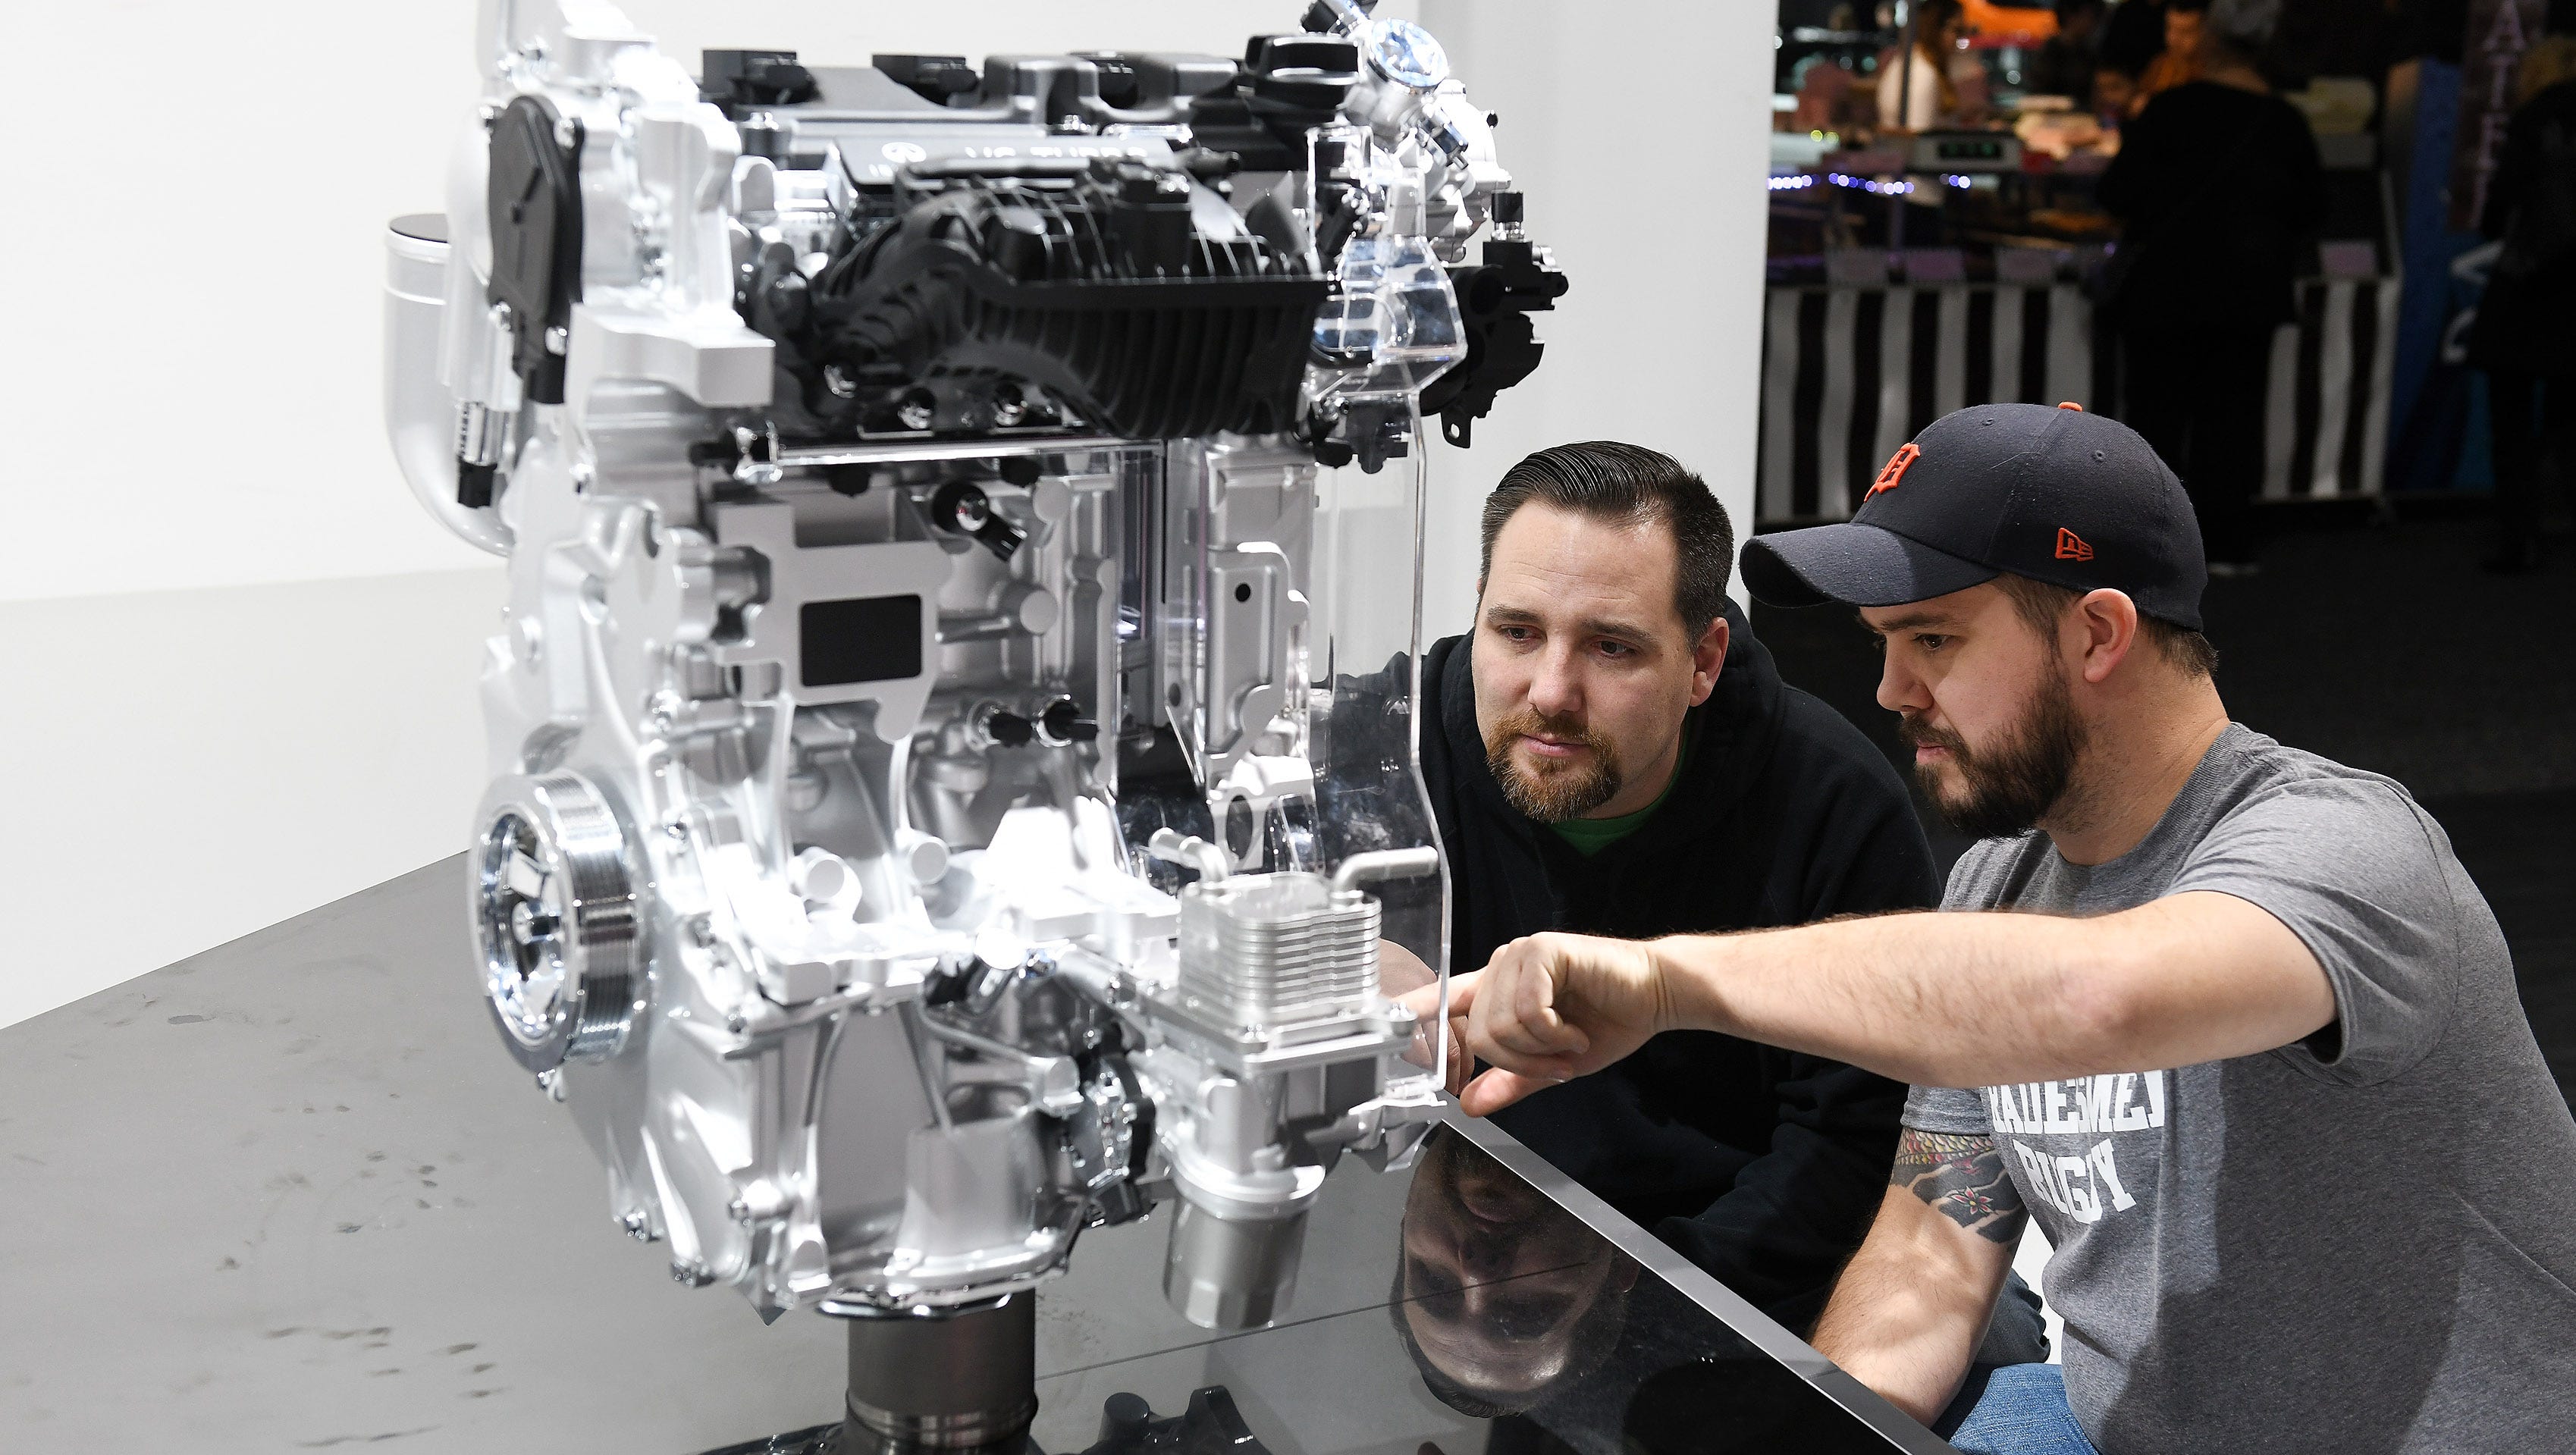 Christopher Rowe, right, 39, of Brownstown and Brent Tobiczyk, 35, of Royal Oak check out the Infiniti variable compression engine model.